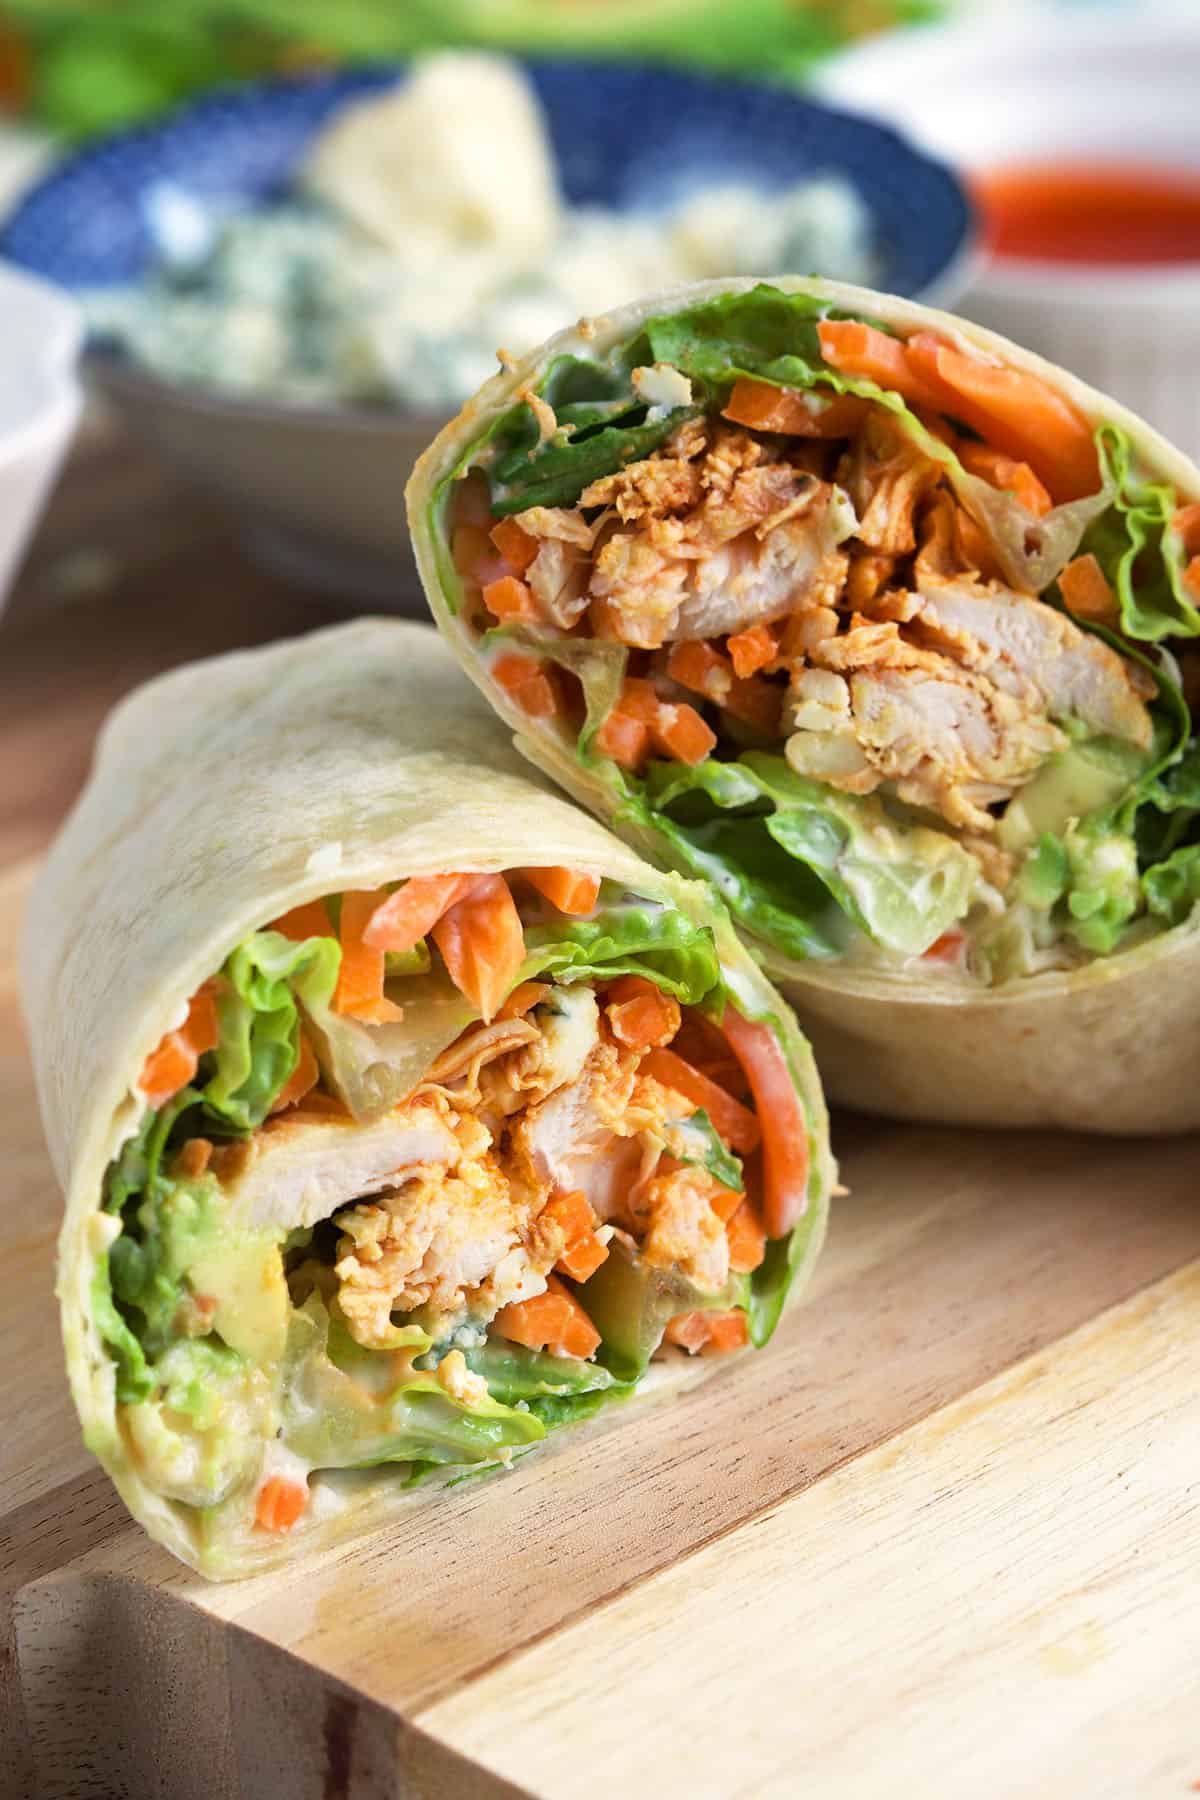 Two halves of a buffalo chicken wrap are placed on a wooden surface. 